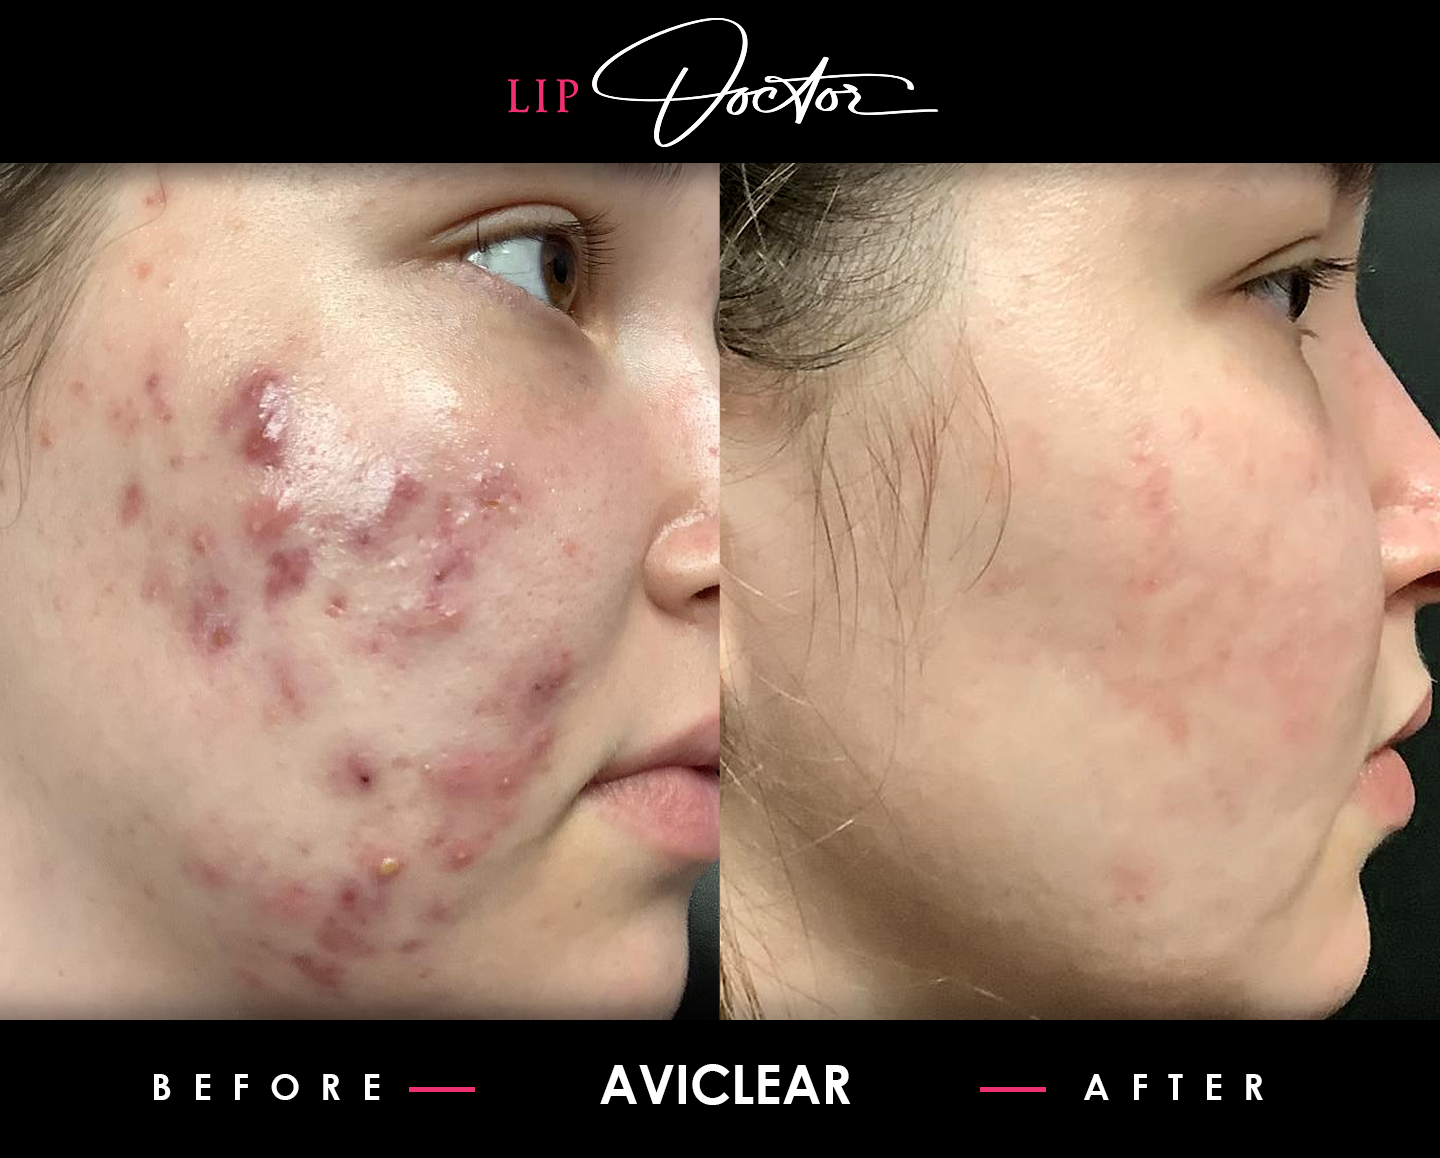 Young woman's dramatic transformation with AviClear treatment, showing extensive acne before and incredible clear skin results after.